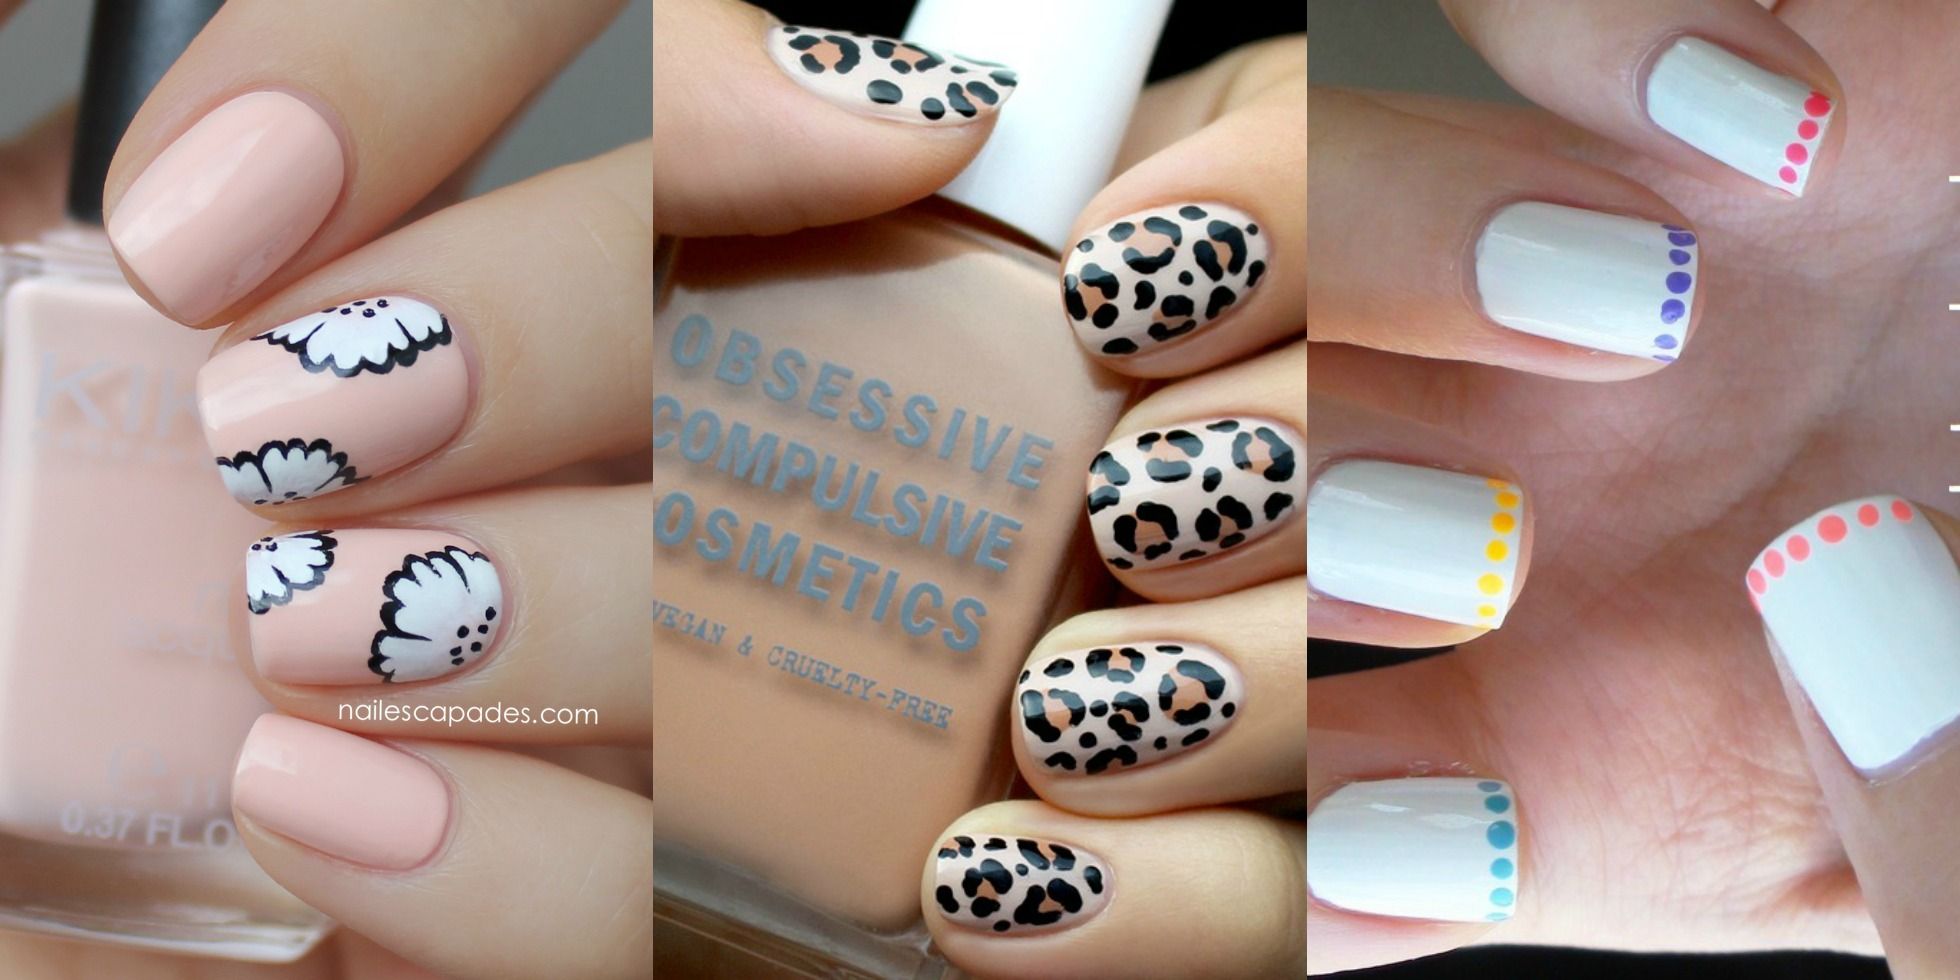 1. Elegant Short Nail Art Designs for Any Occasion - wide 9